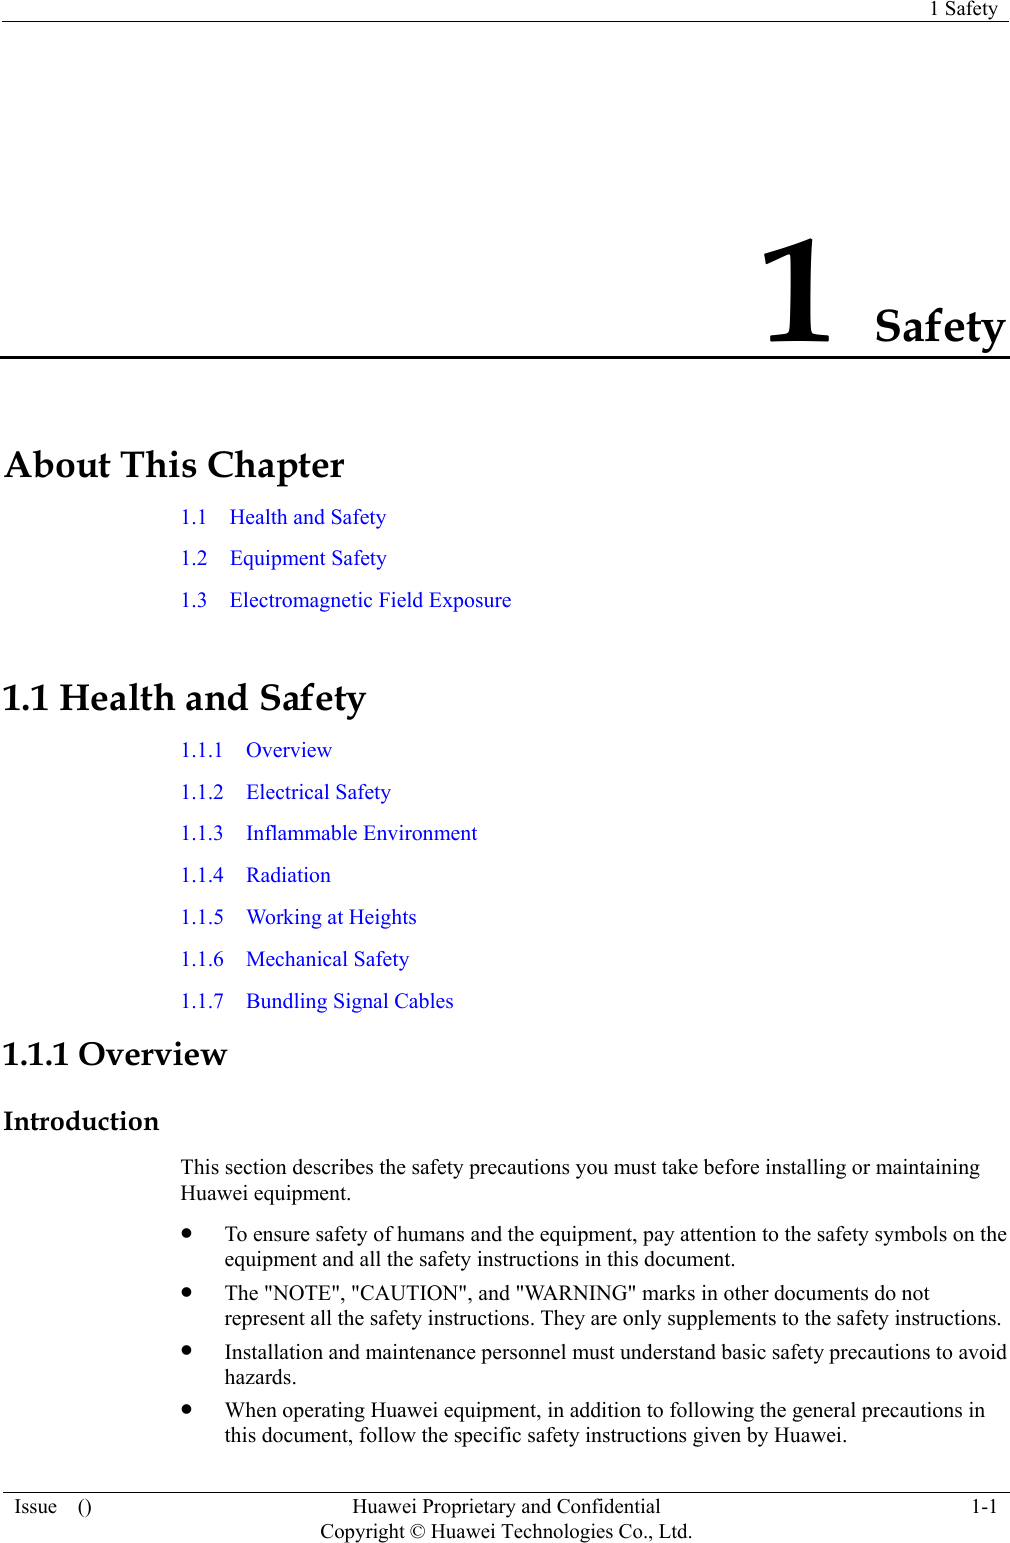   1 Safety  Issue  ()  Huawei Proprietary and Confidential     Copyright © Huawei Technologies Co., Ltd. 1-1  1 Safety About This Chapter 1.1  Health and Safety 1.2  Equipment Safety 1.3  Electromagnetic Field Exposure 1.1 Health and Safety 1.1.1  Overview 1.1.2  Electrical Safety 1.1.3  Inflammable Environment 1.1.4  Radiation 1.1.5  Working at Heights 1.1.6  Mechanical Safety 1.1.7  Bundling Signal Cables 1.1.1 Overview Introduction This section describes the safety precautions you must take before installing or maintaining Huawei equipment.  To ensure safety of humans and the equipment, pay attention to the safety symbols on the equipment and all the safety instructions in this document.  The &quot;NOTE&quot;, &quot;CAUTION&quot;, and &quot;WARNING&quot; marks in other documents do not represent all the safety instructions. They are only supplements to the safety instructions.  Installation and maintenance personnel must understand basic safety precautions to avoid hazards.  When operating Huawei equipment, in addition to following the general precautions in this document, follow the specific safety instructions given by Huawei. 